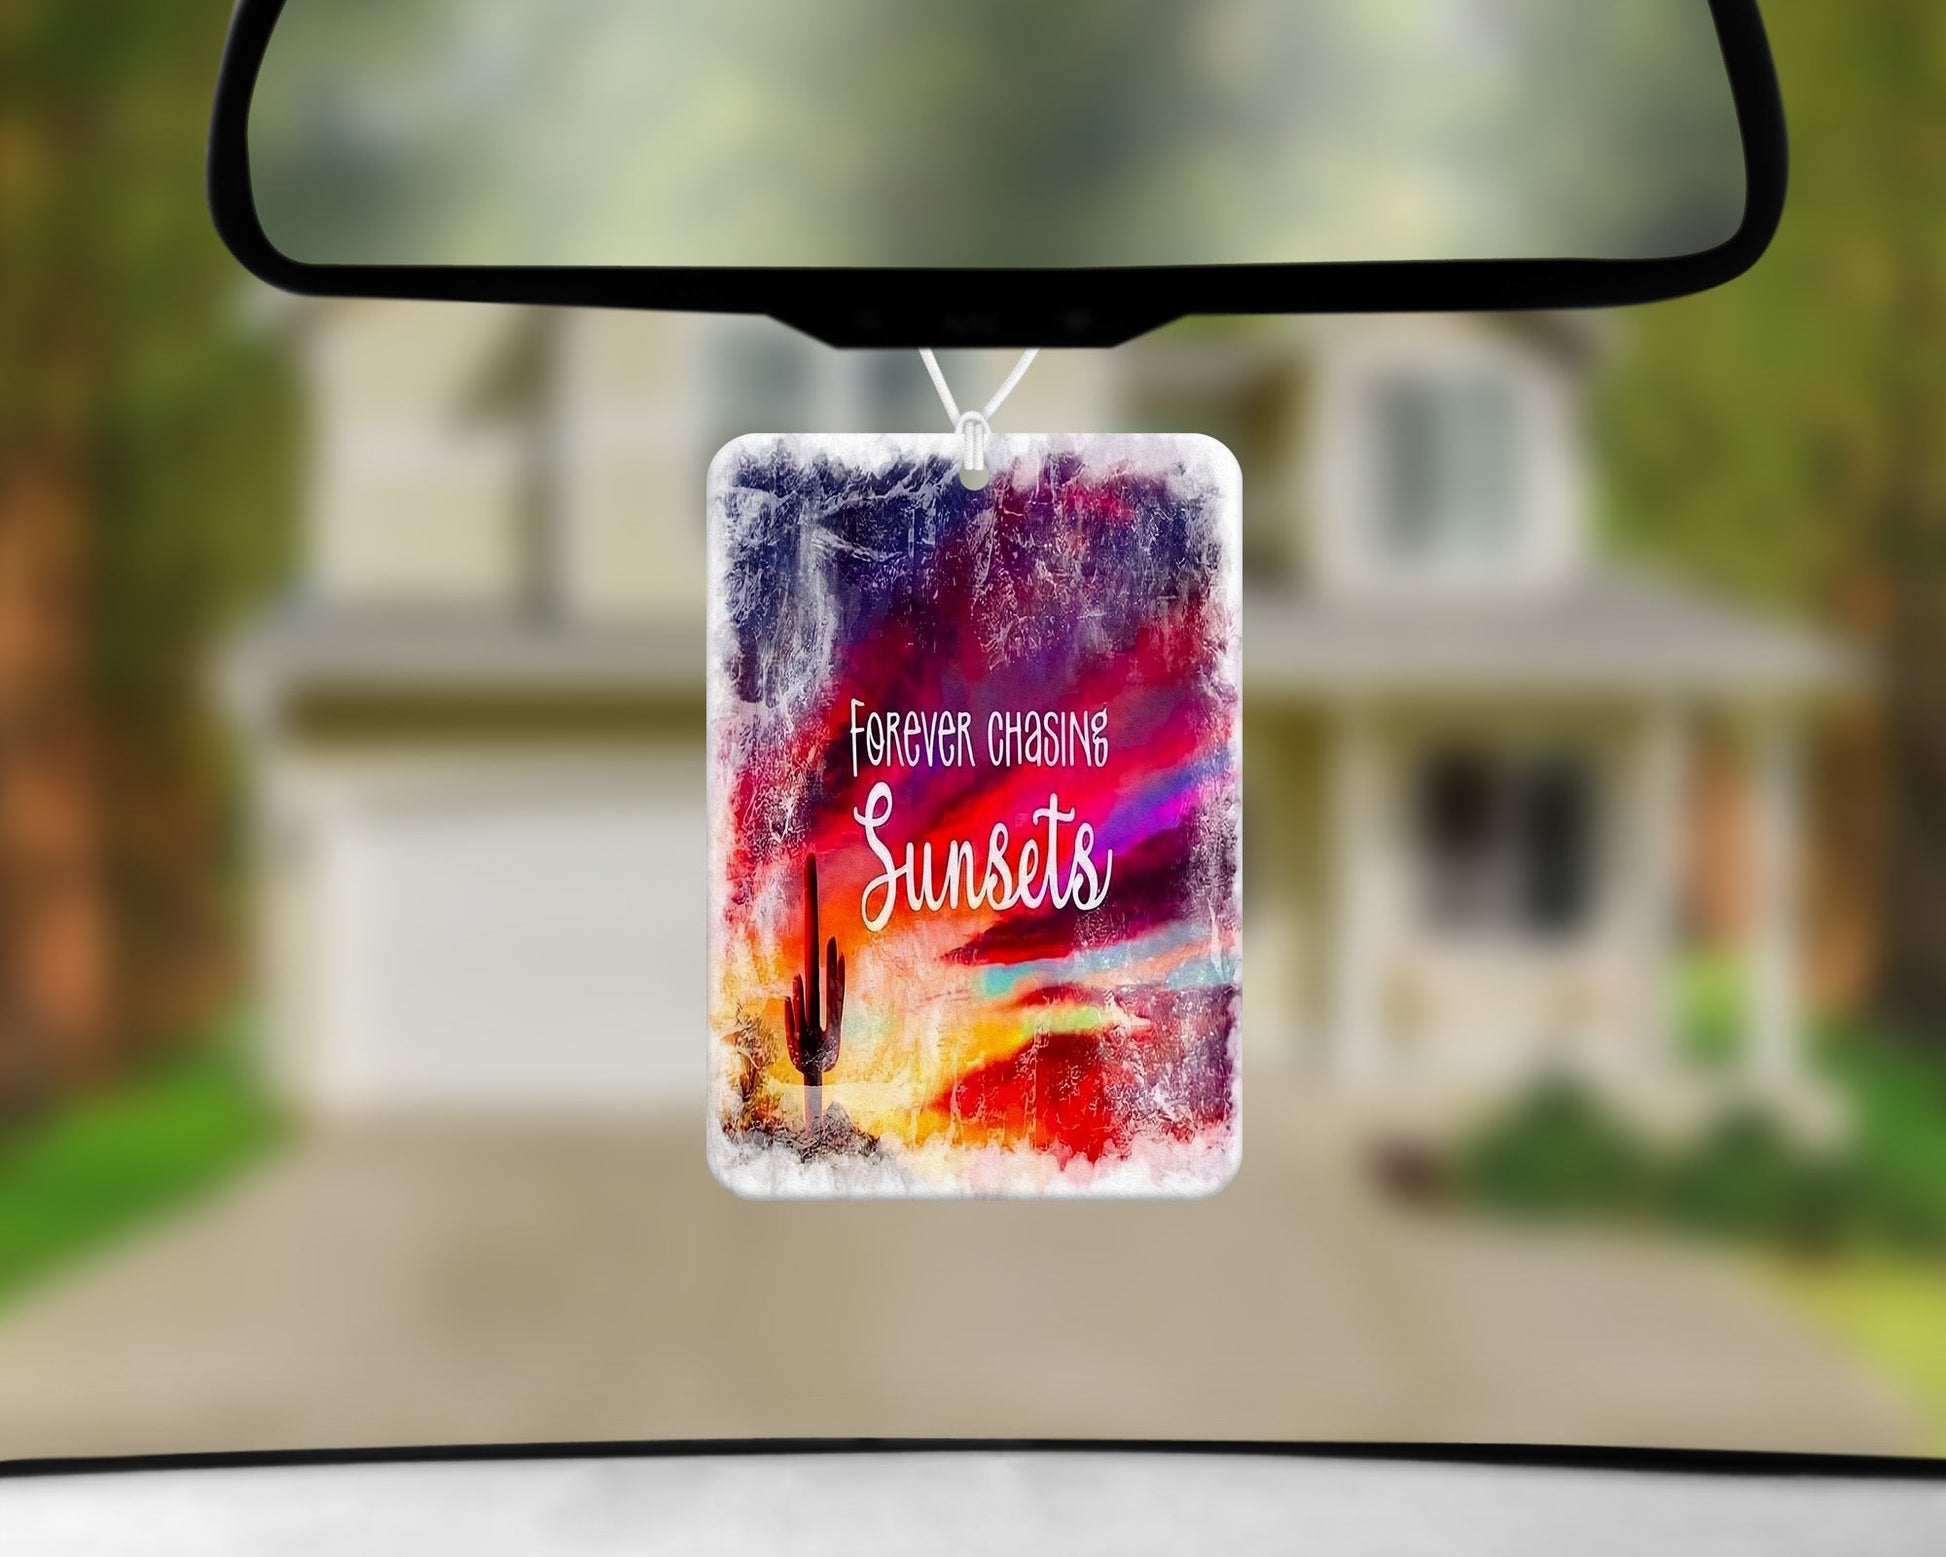 Forever Chasing Sunsets|Freshie|Includes Scent Bottle - Vehicle Air Freshener